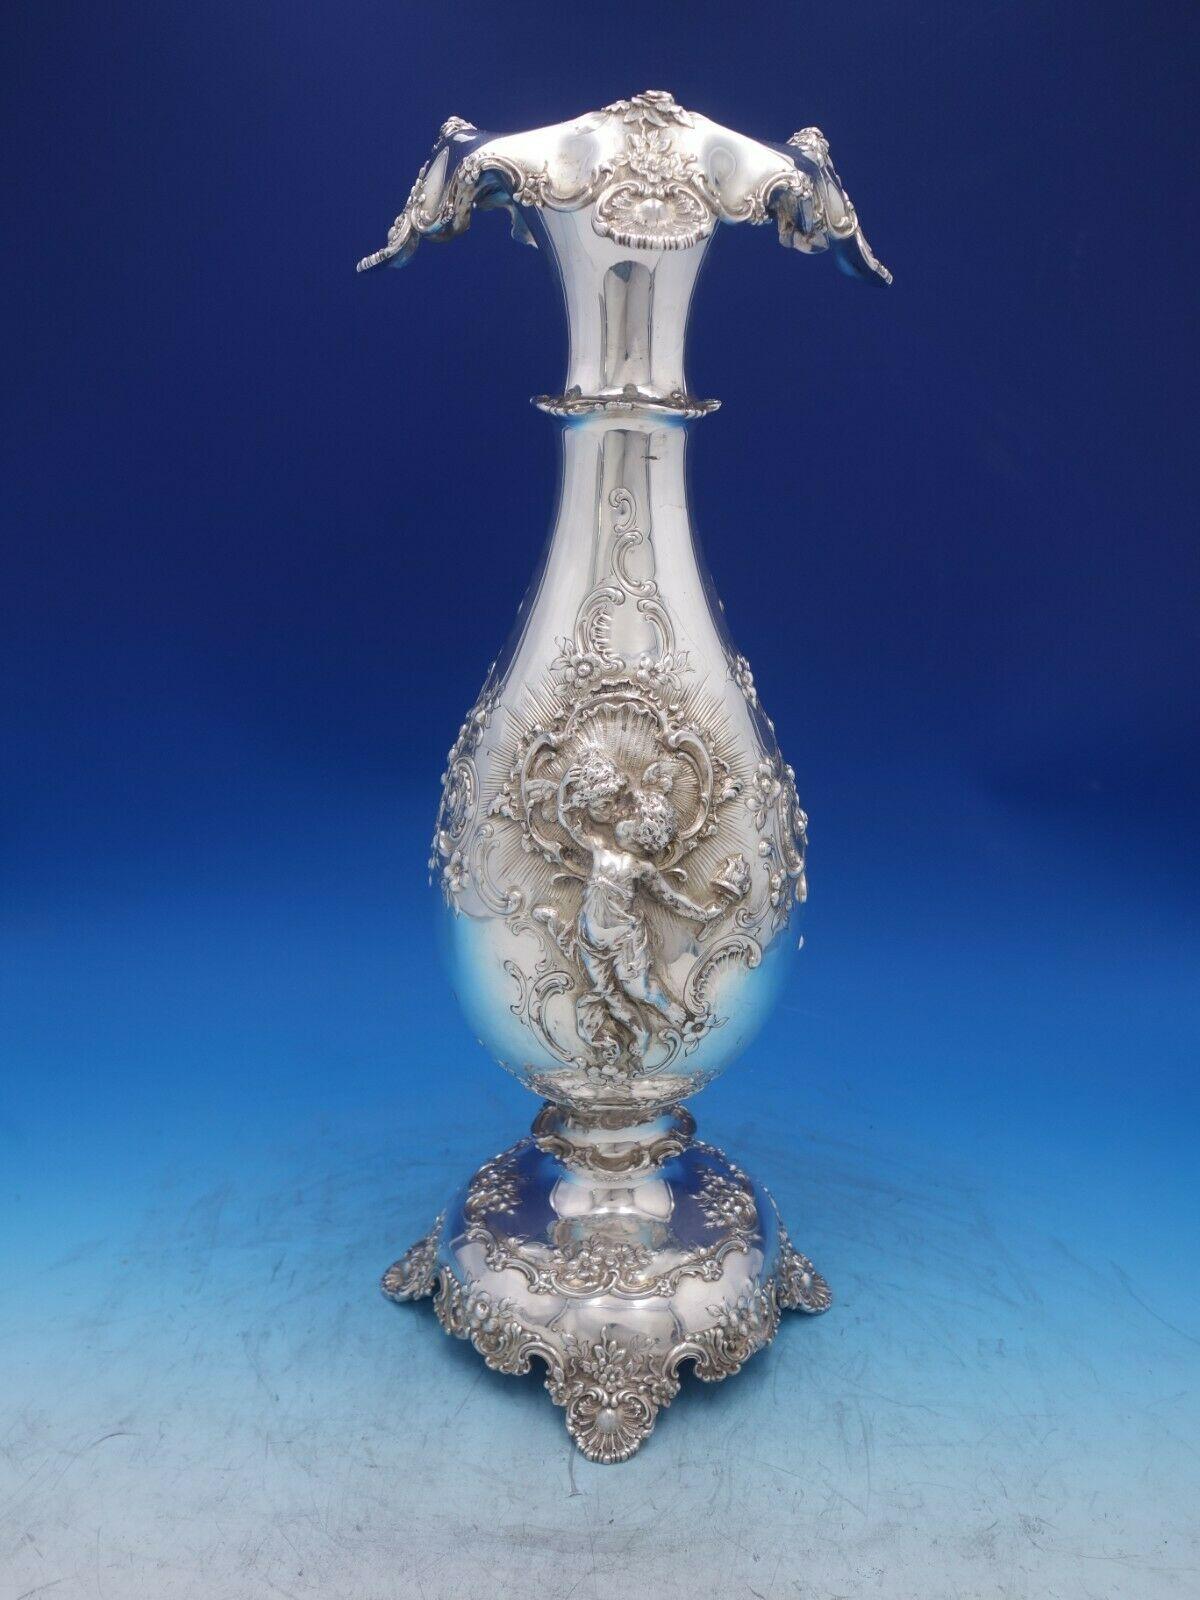 Tiffany and Co.

Magnificent pair of antique Tiffany and Co. large vases with 3-dimensional applied cupids in fine detail playing instruments and painting. The detail is incredible. The vases also have beautiful rococo and repousse detailing. They